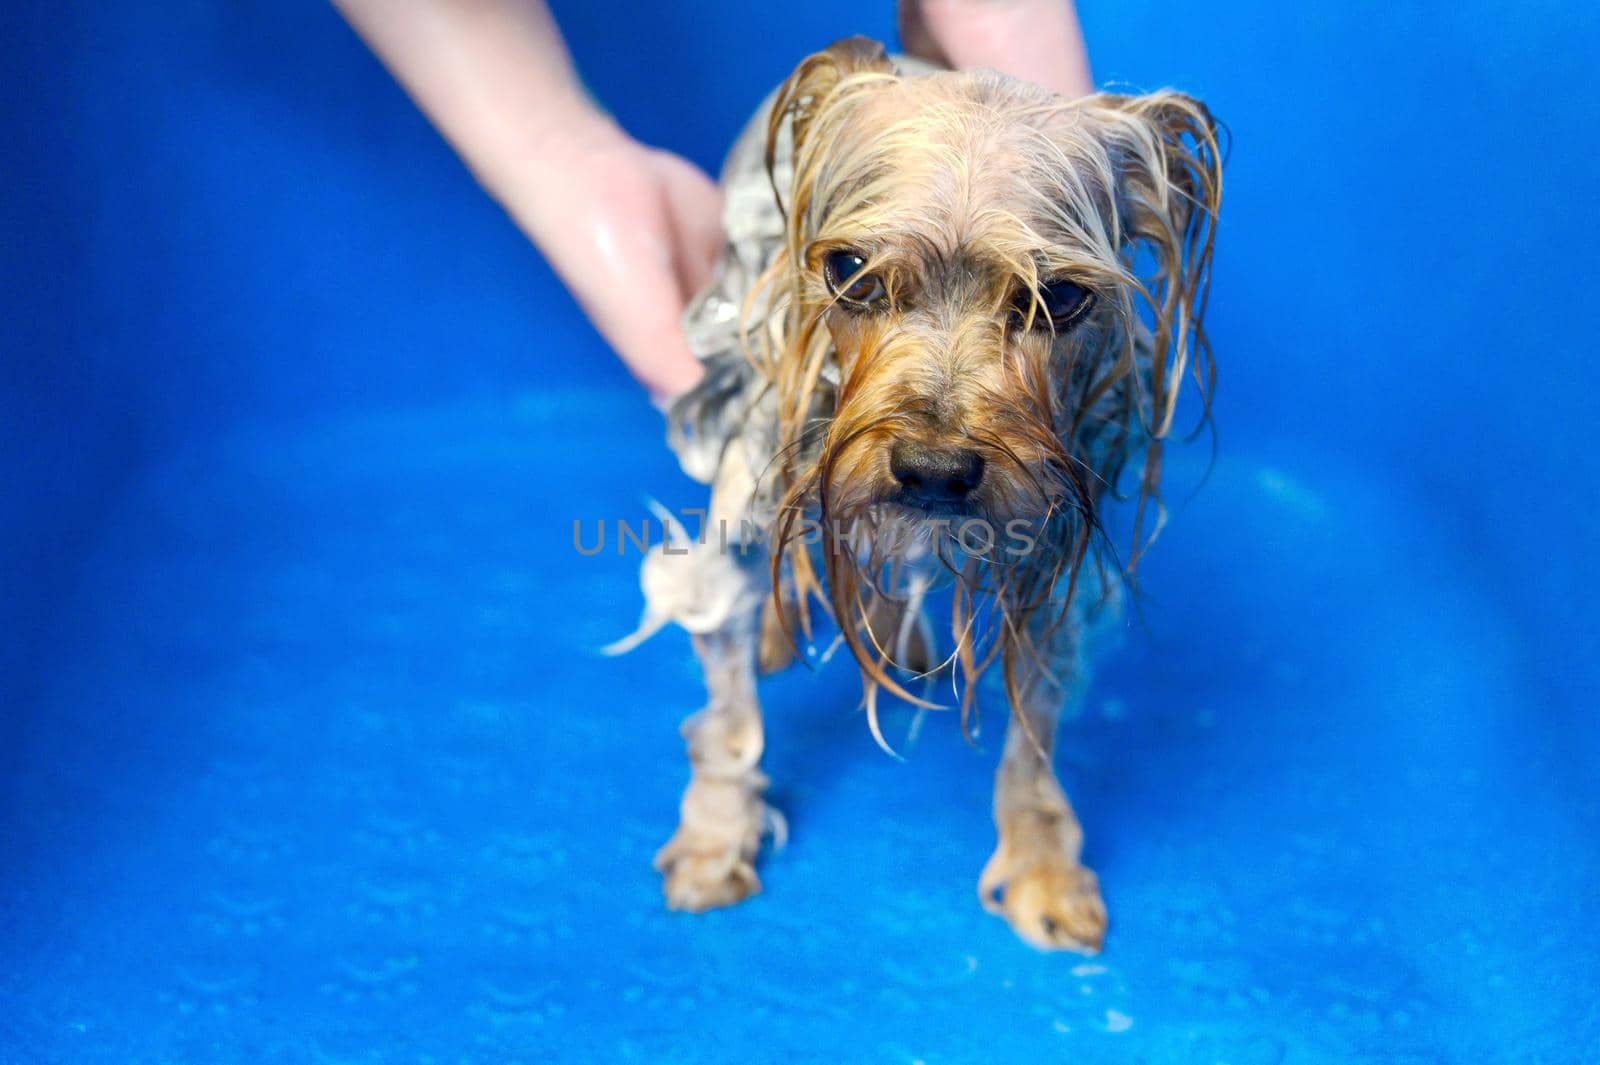 Professional pet groomer washing Yorkshire terrier with shampoo in pet grooming salon. High quality photo.